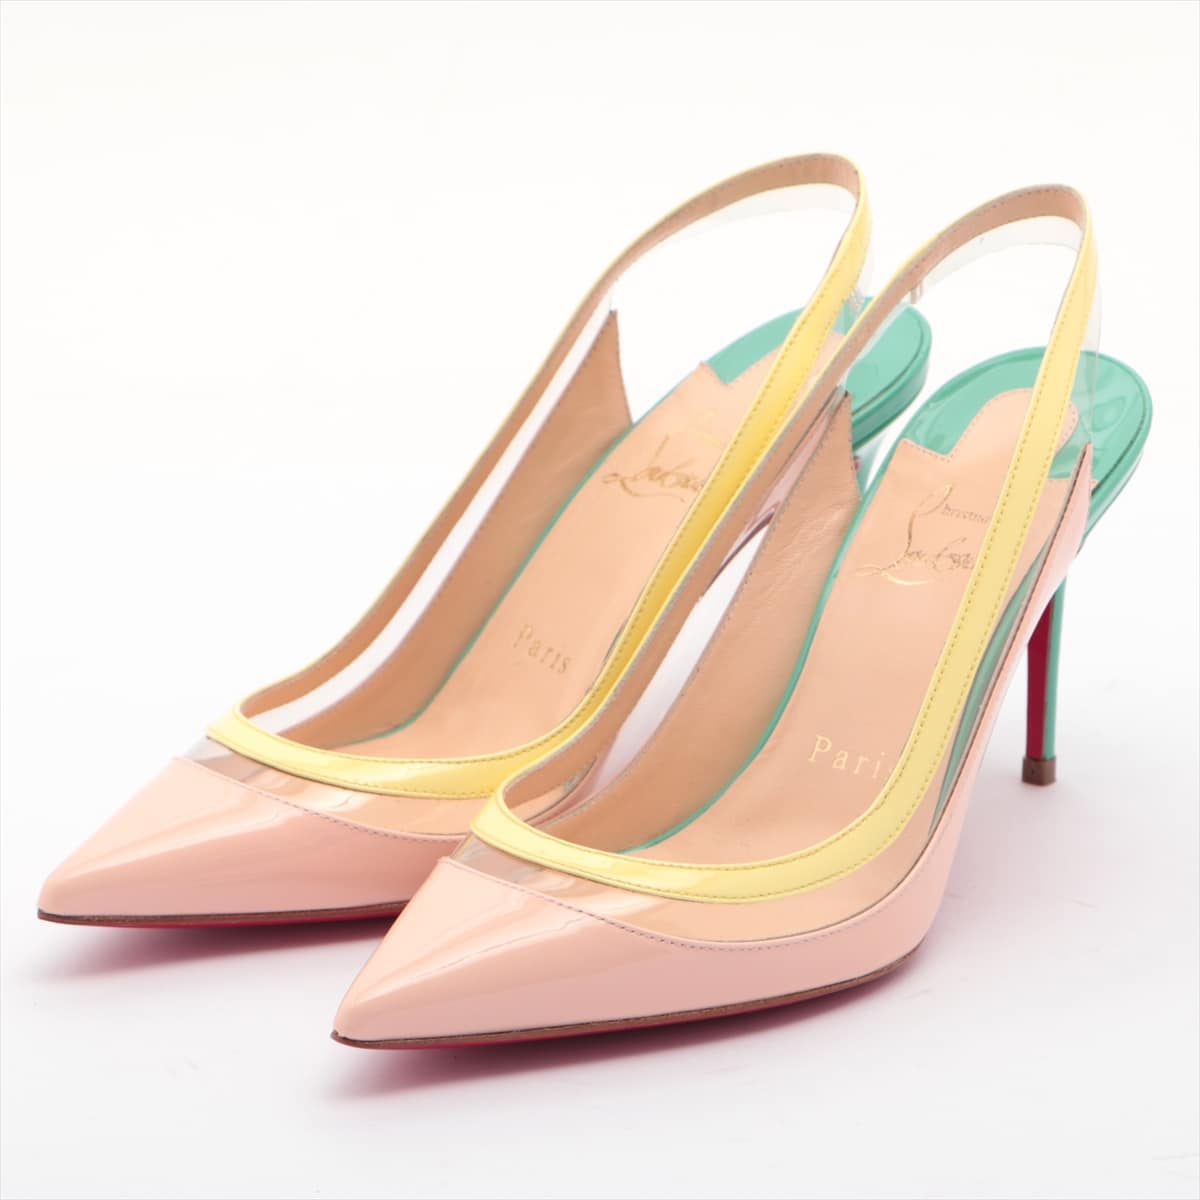 Christian Louboutin Patent leather Pumps 35 Ladies' Pink beige